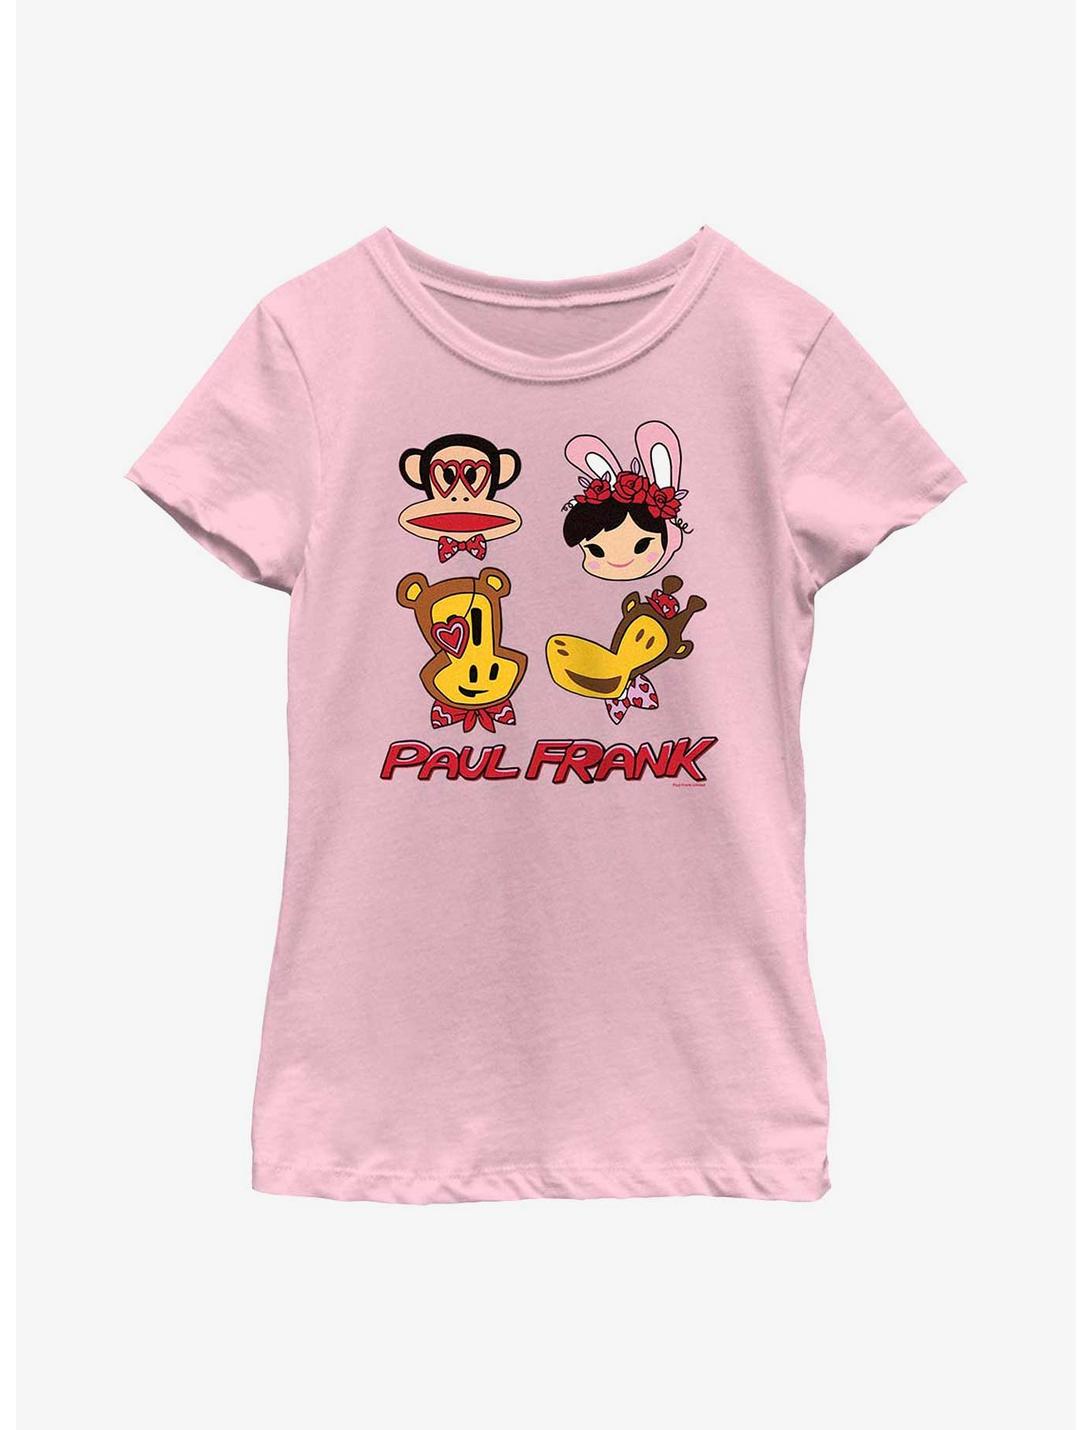 Paul Frank Valentine's Characters Youth Girls T-Shirt, PINK, hi-res